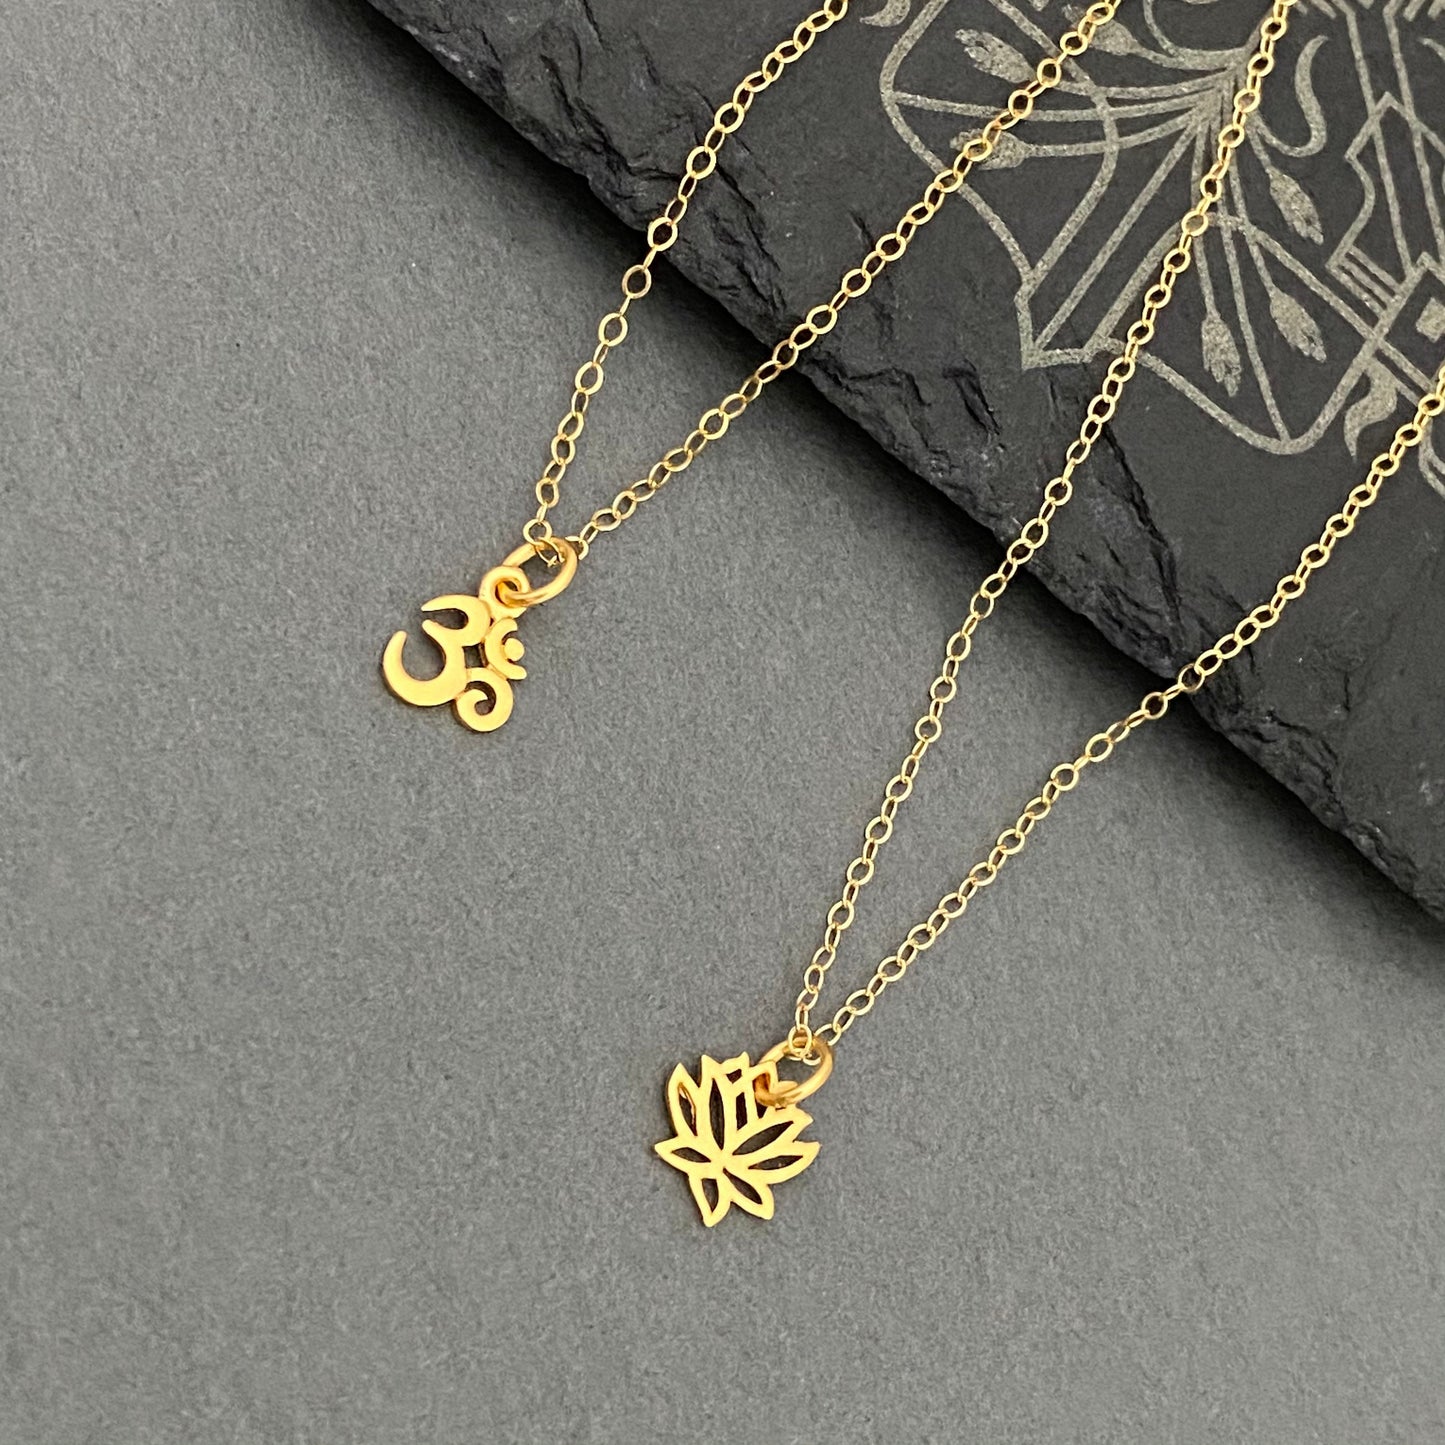 Om and Lotus flower layering necklaces, Yoga Jewelry, Spiritual Jewelry, layered necklace, om necklace